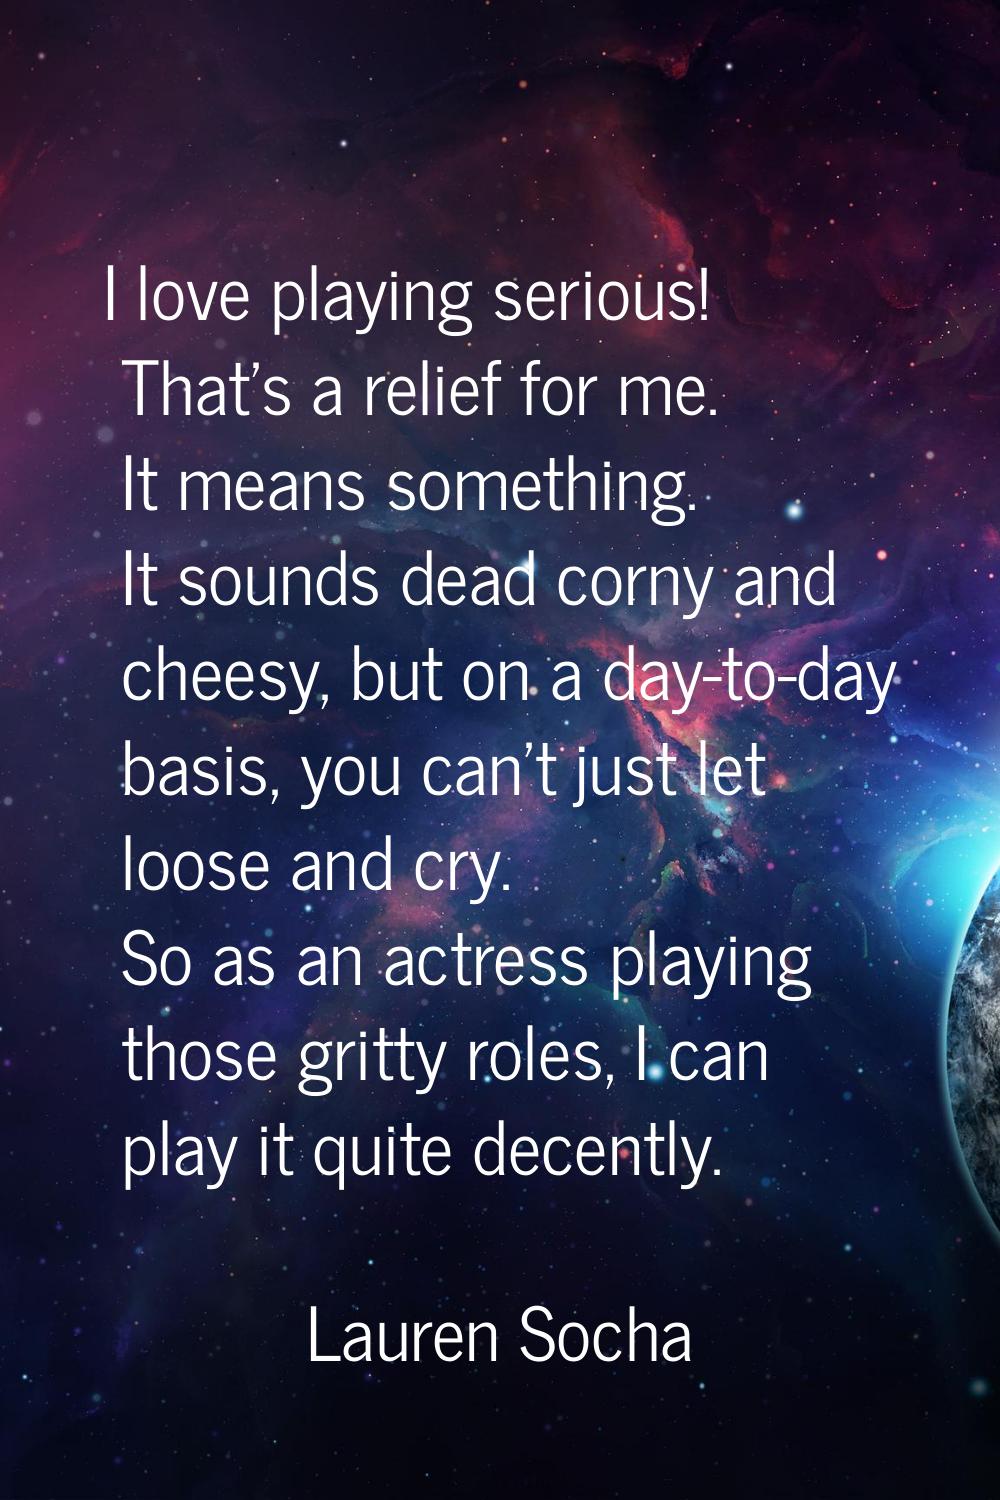 I love playing serious! That's a relief for me. It means something. It sounds dead corny and cheesy